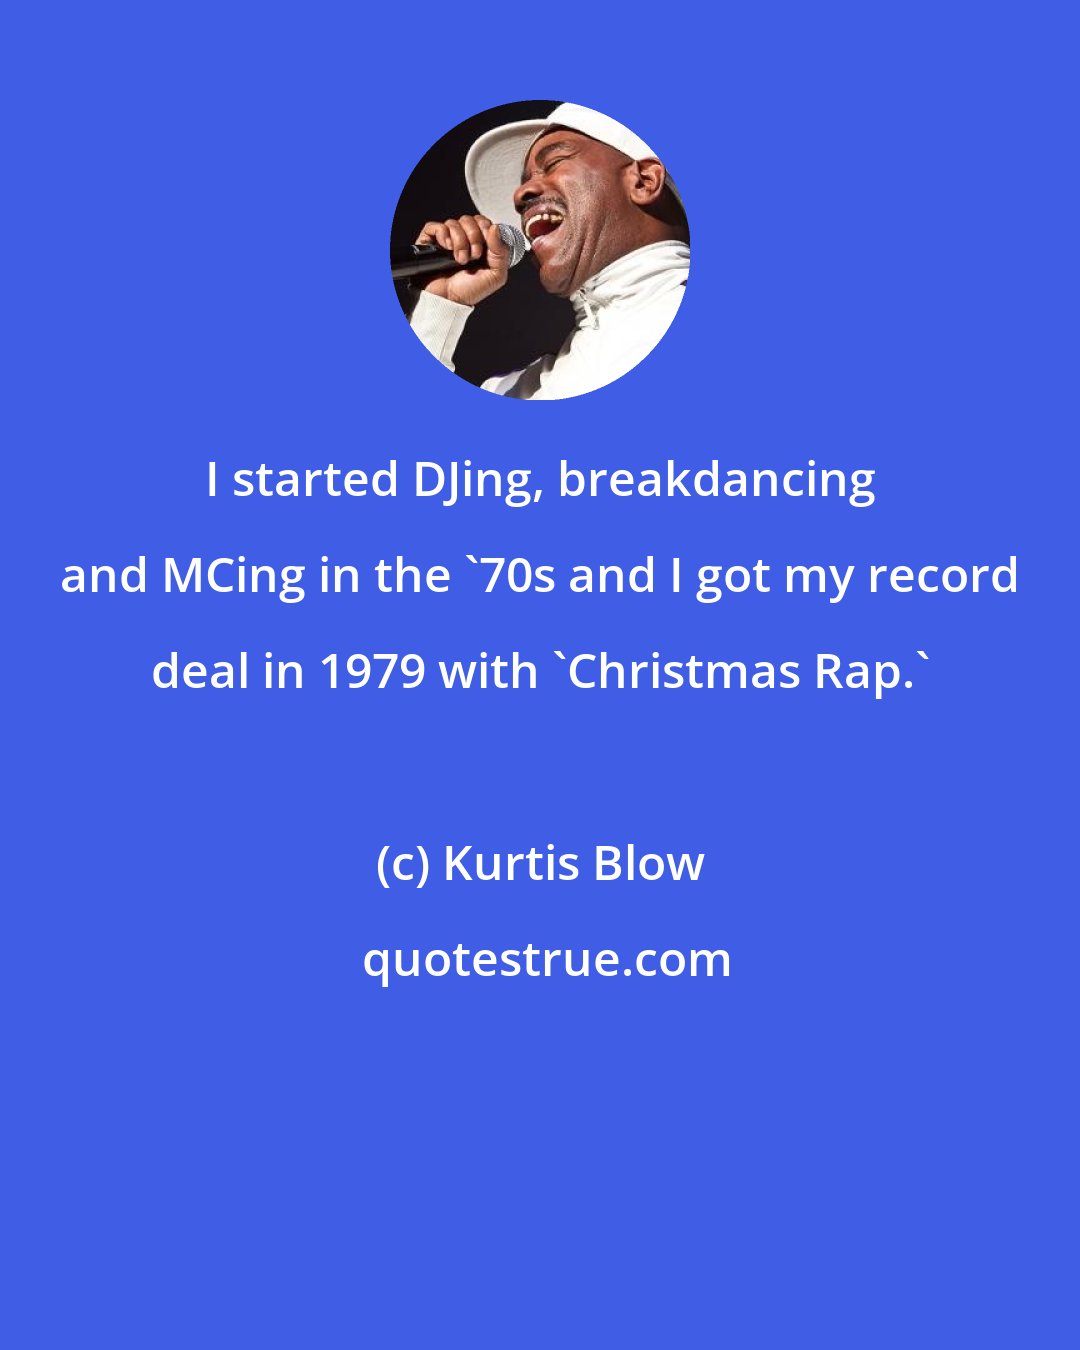 Kurtis Blow: I started DJing, breakdancing and MCing in the '70s and I got my record deal in 1979 with 'Christmas Rap.'